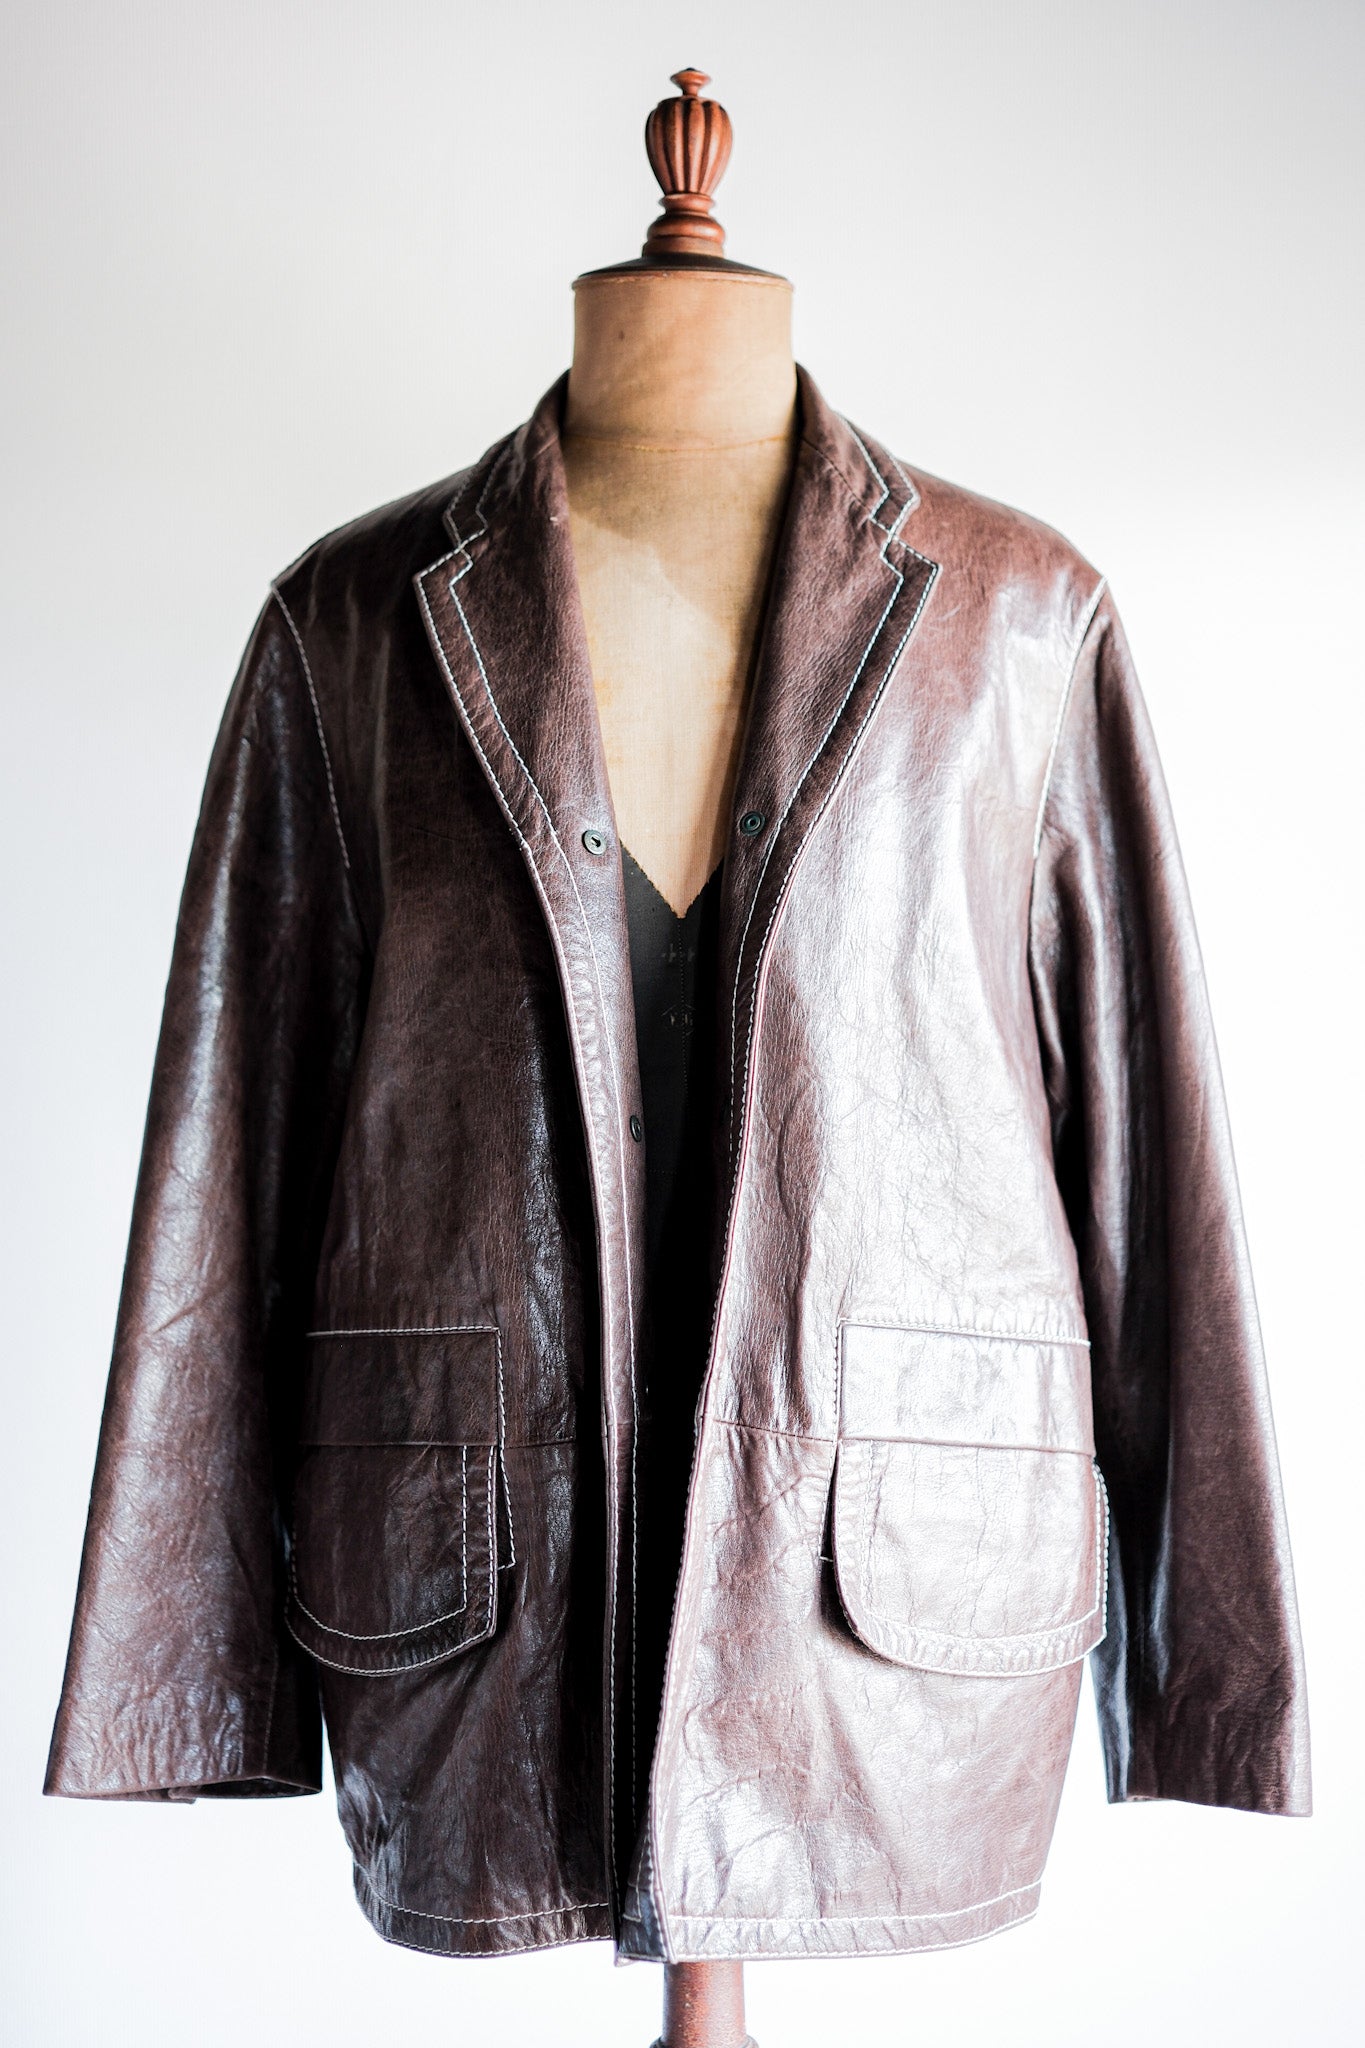 【~90’s】Old ANNE MARIE BERETTA Leather Tailored Jacket Size.T42